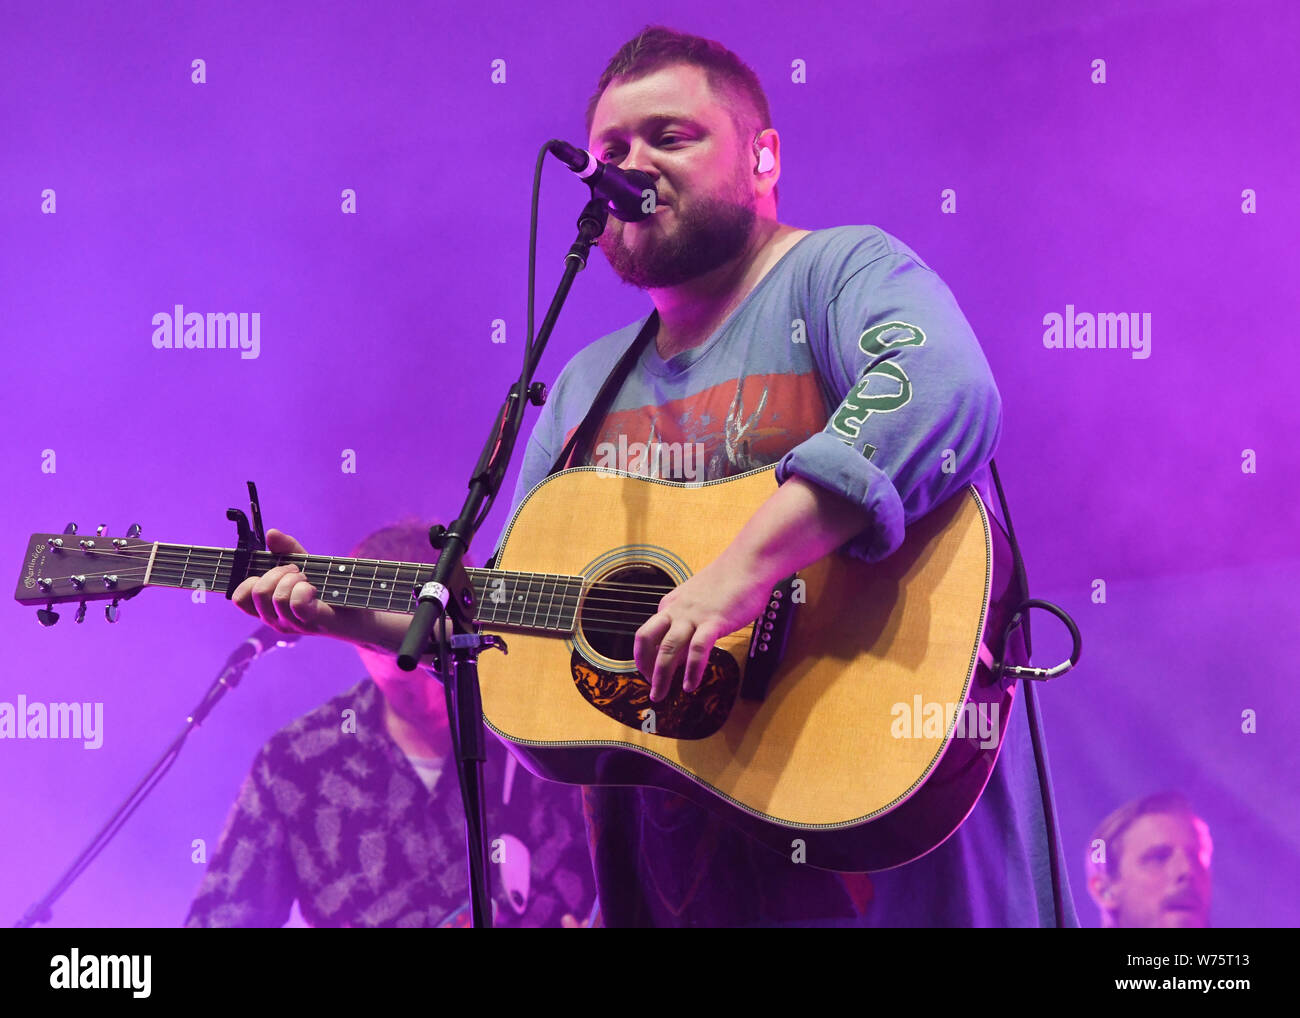 Ragnar þórhallsson performs at ALT 98.7 Summer Camp at the Queen Mary in Long Beach on August 3, 2019. performs at ALT 98.7 Summer Camp at the Queen Mary in Long Beach on August 3, 2019. Stock Photo